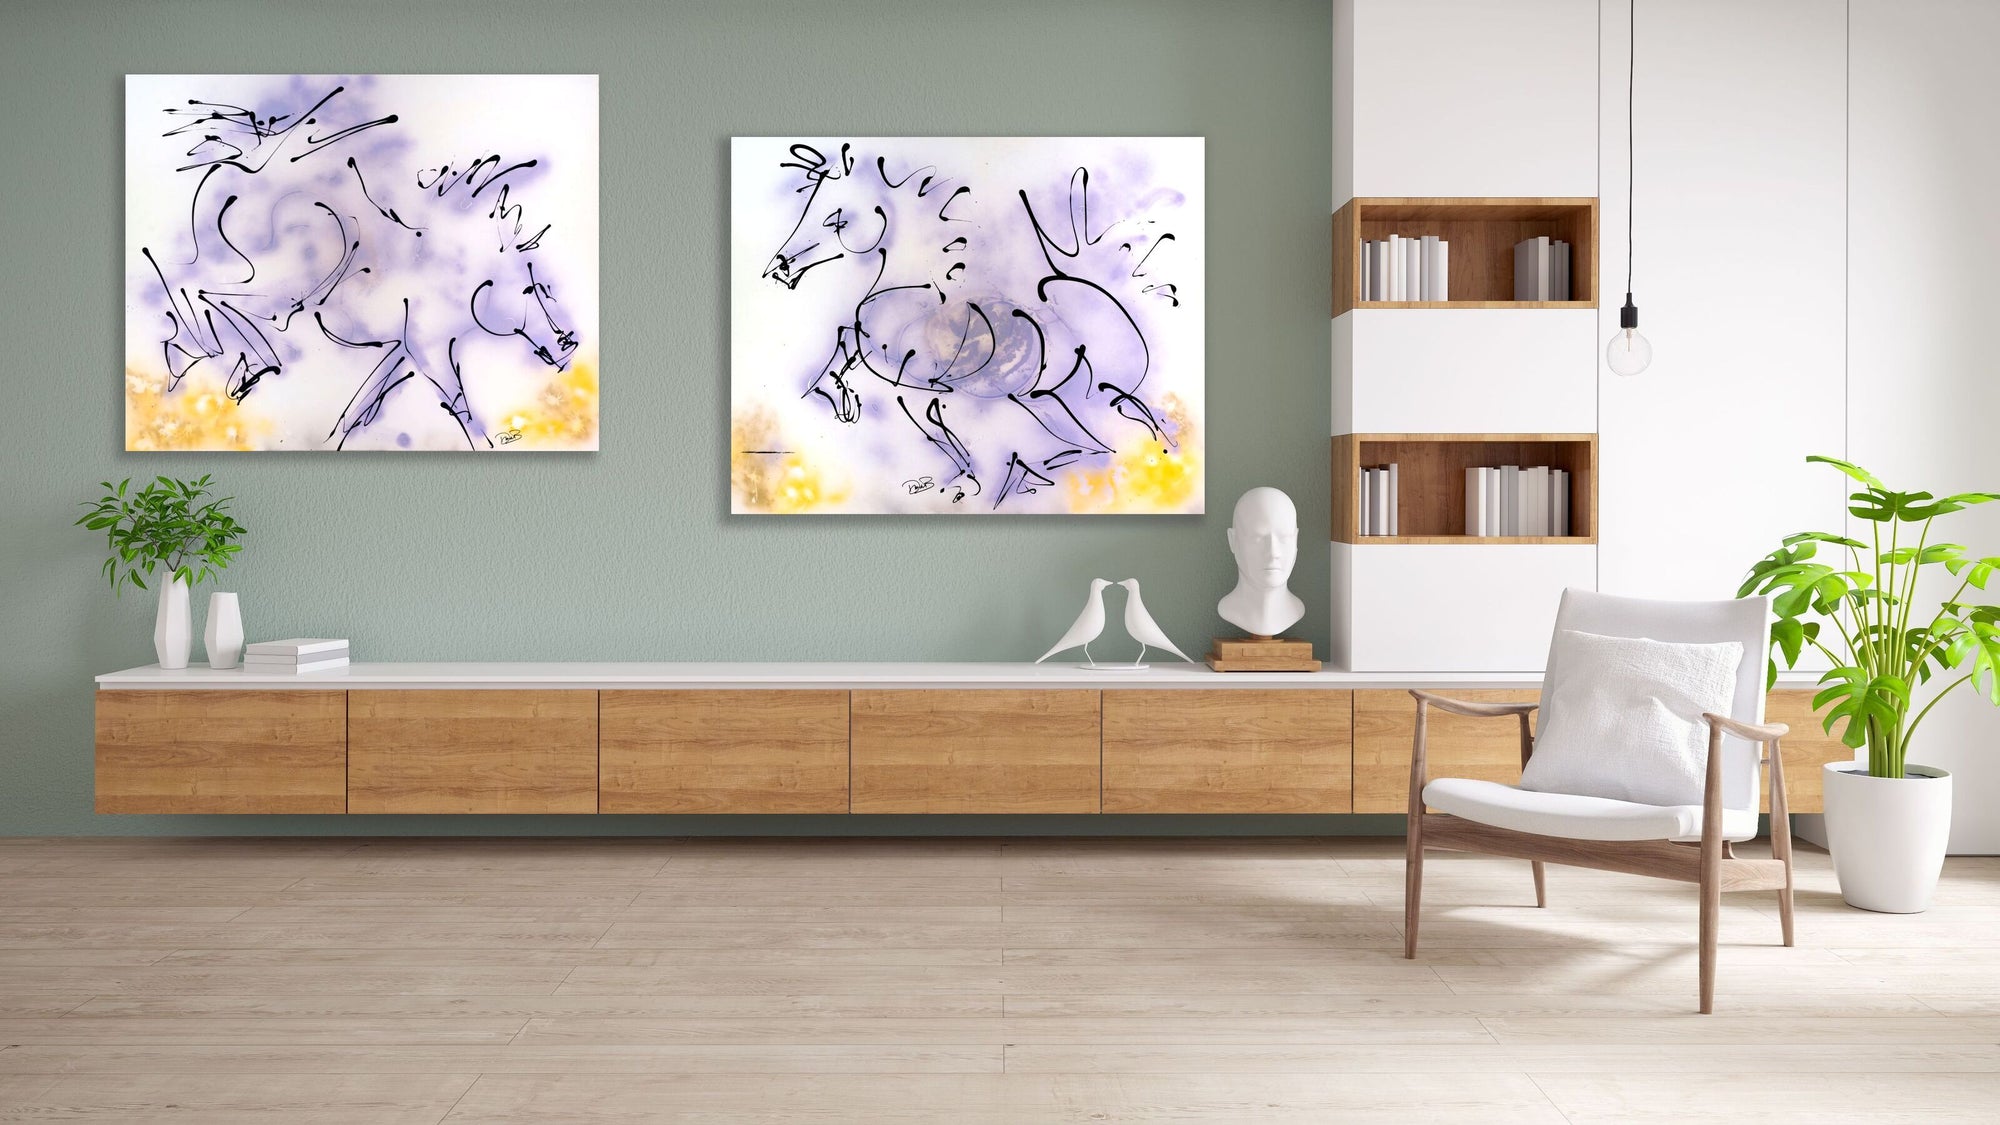 colorful abstract horse painting, movement fun and horse energy, stylized interior designer art for home or office, wall decor, equines, horses, equestrians, running horses, horseback riding